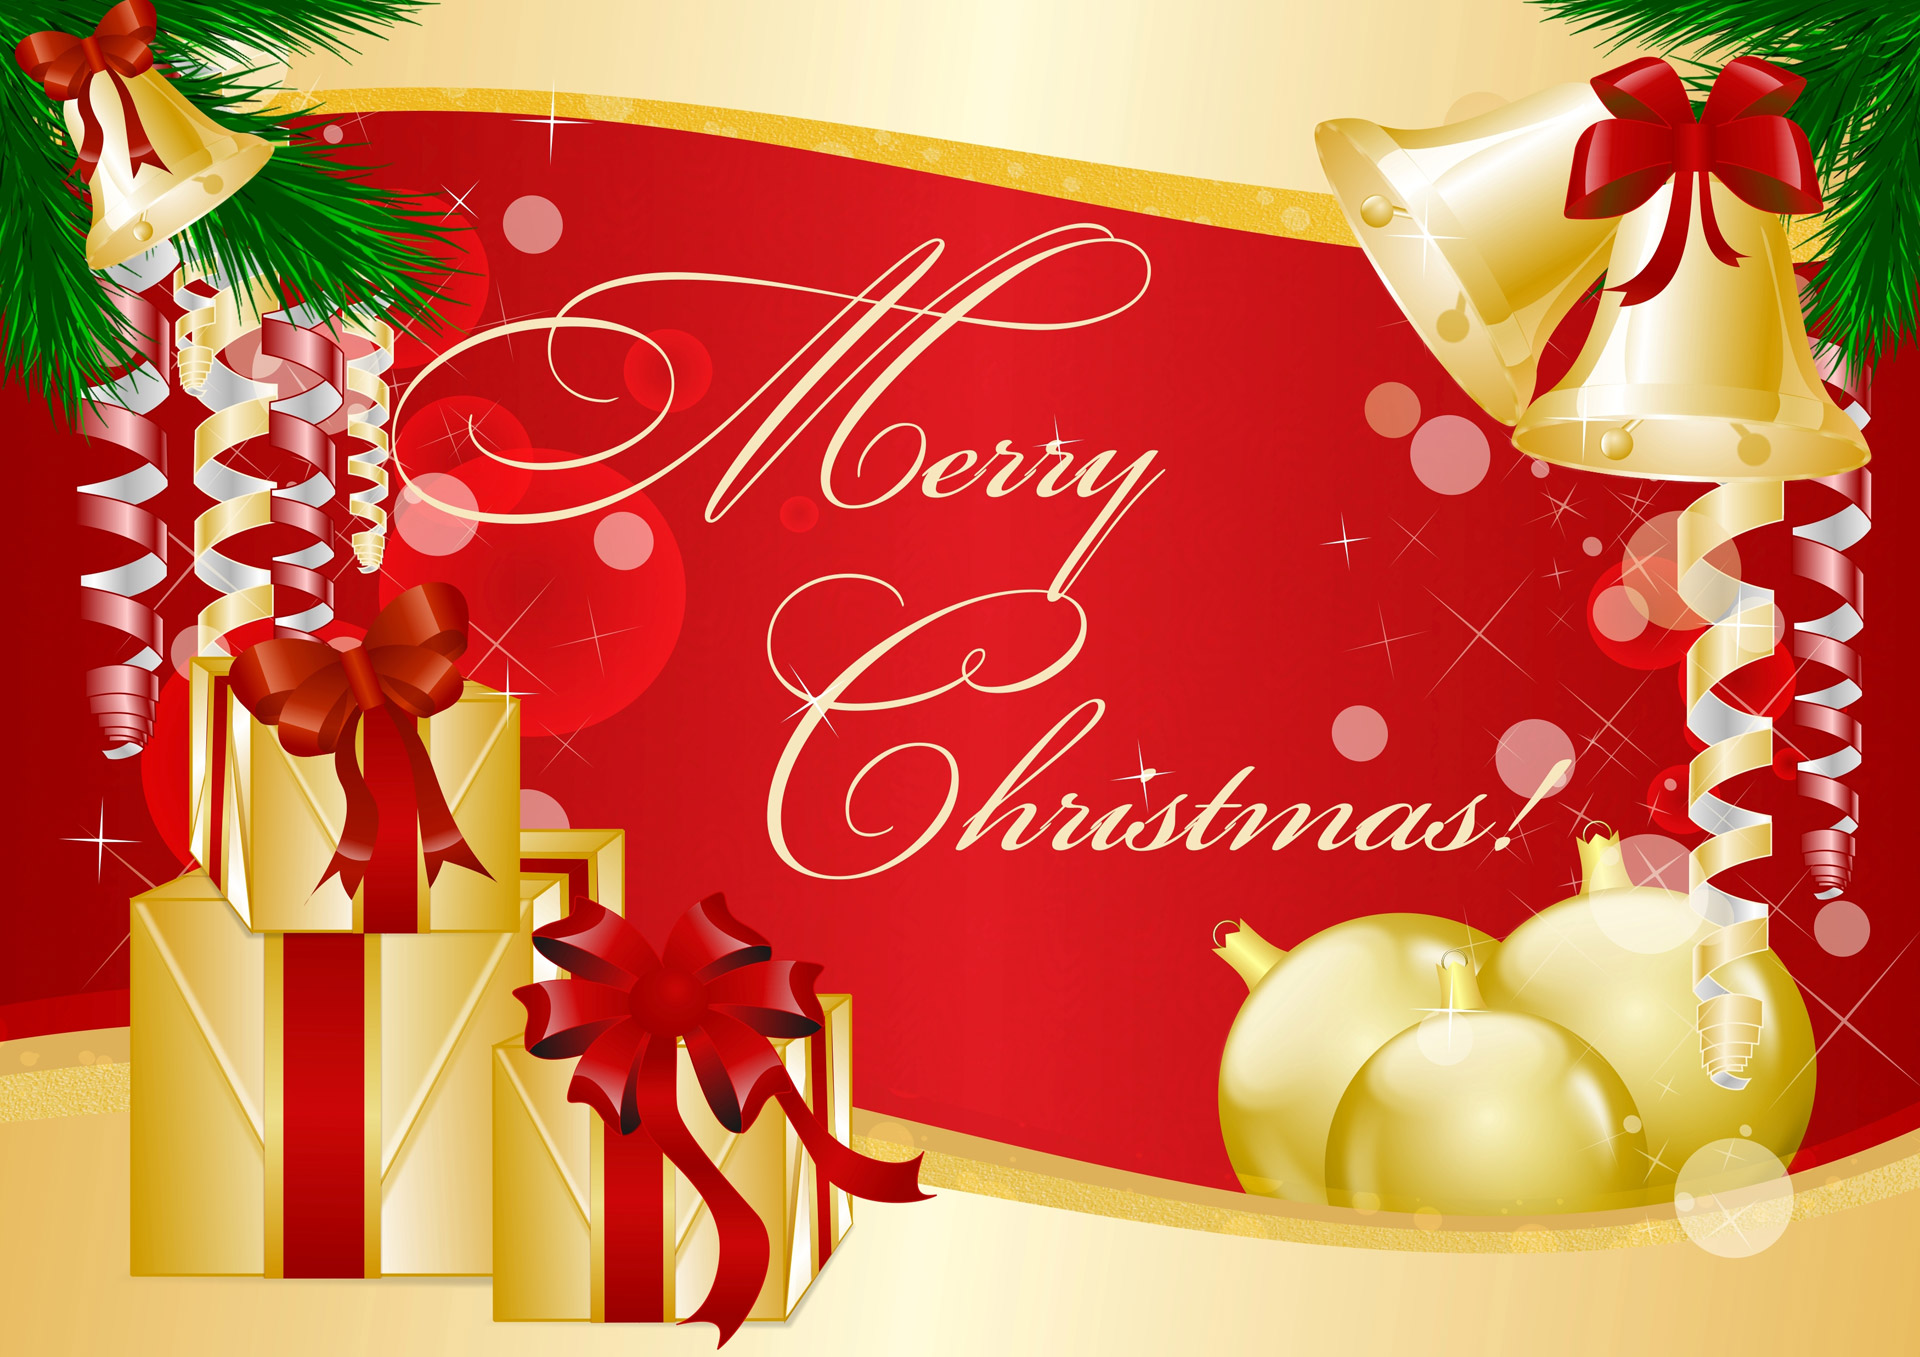 Download 9 Merry Christmas Images to Post on Facebook, Twitter ...